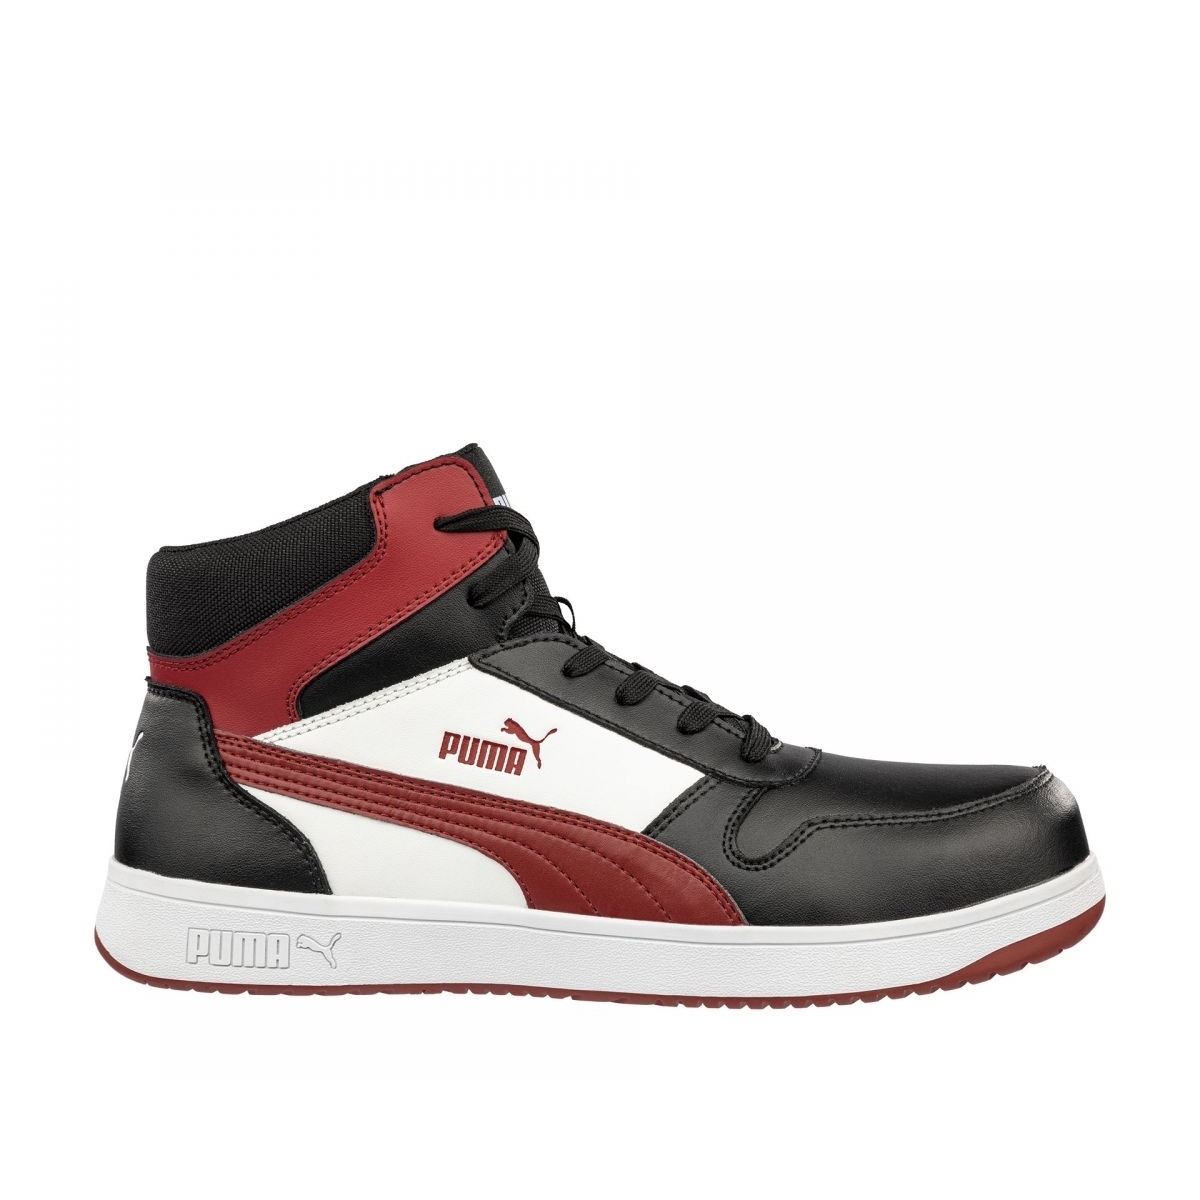 PUMA Safety Men's Frontcourt Mid Composite Toe Waterproof Work Boot Black/White/Red - 630055 BLK/ WHT/RED - BLK/ WHT/RED, 13